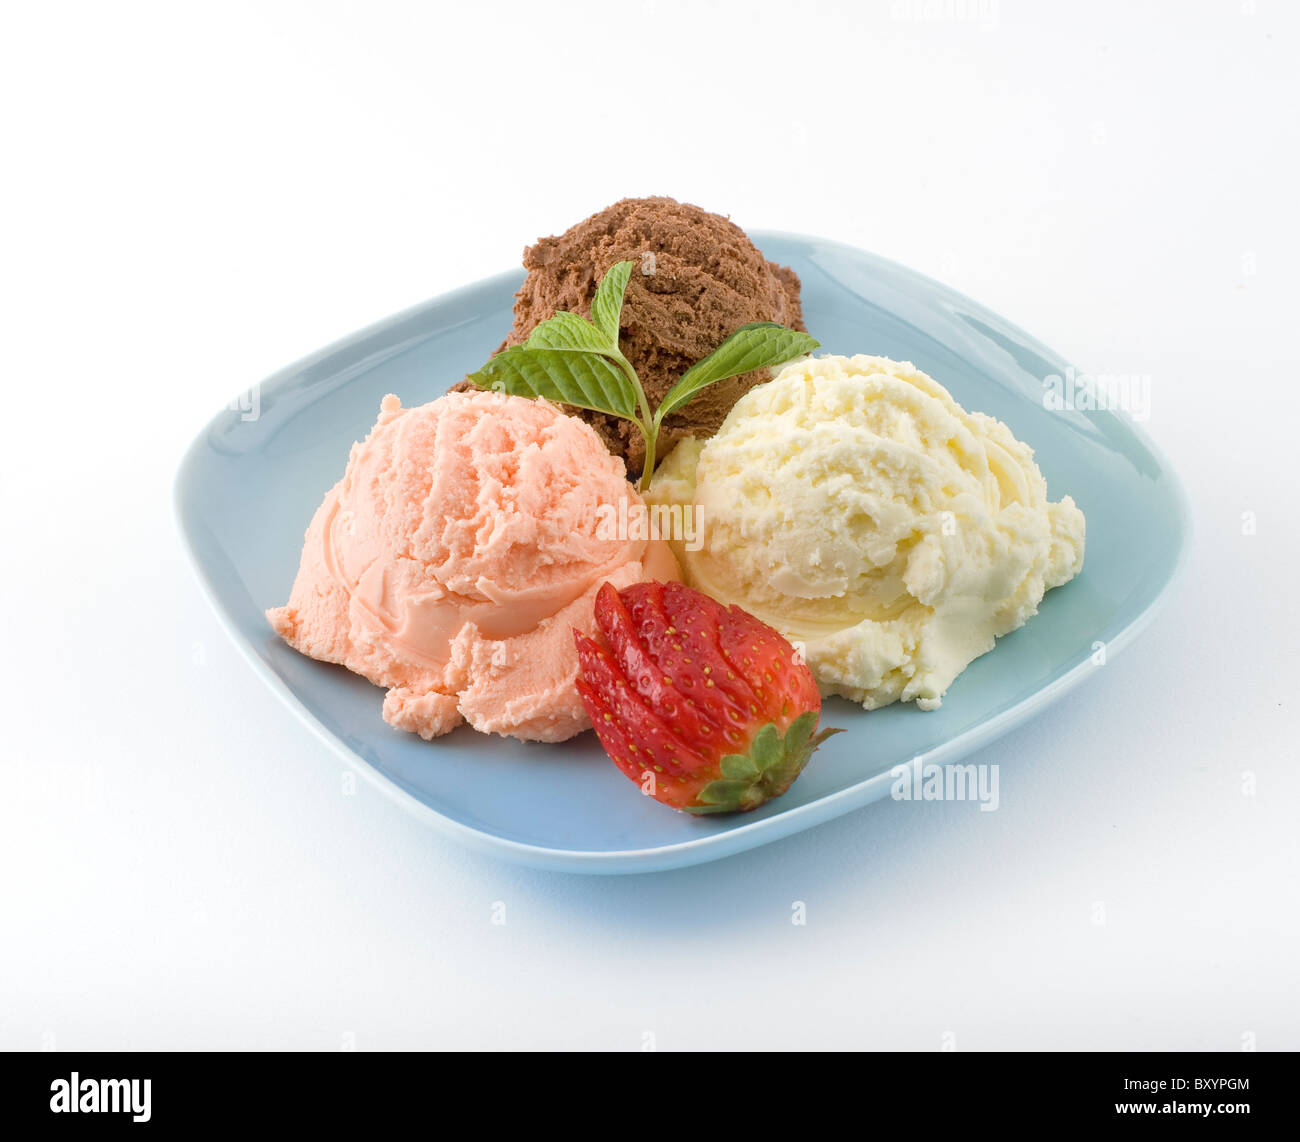 https://c8.alamy.com/comp/BXYPGM/three-flavored-ice-cream-scoops-on-a-pale-blue-plate-with-strawberry-BXYPGM.jpg